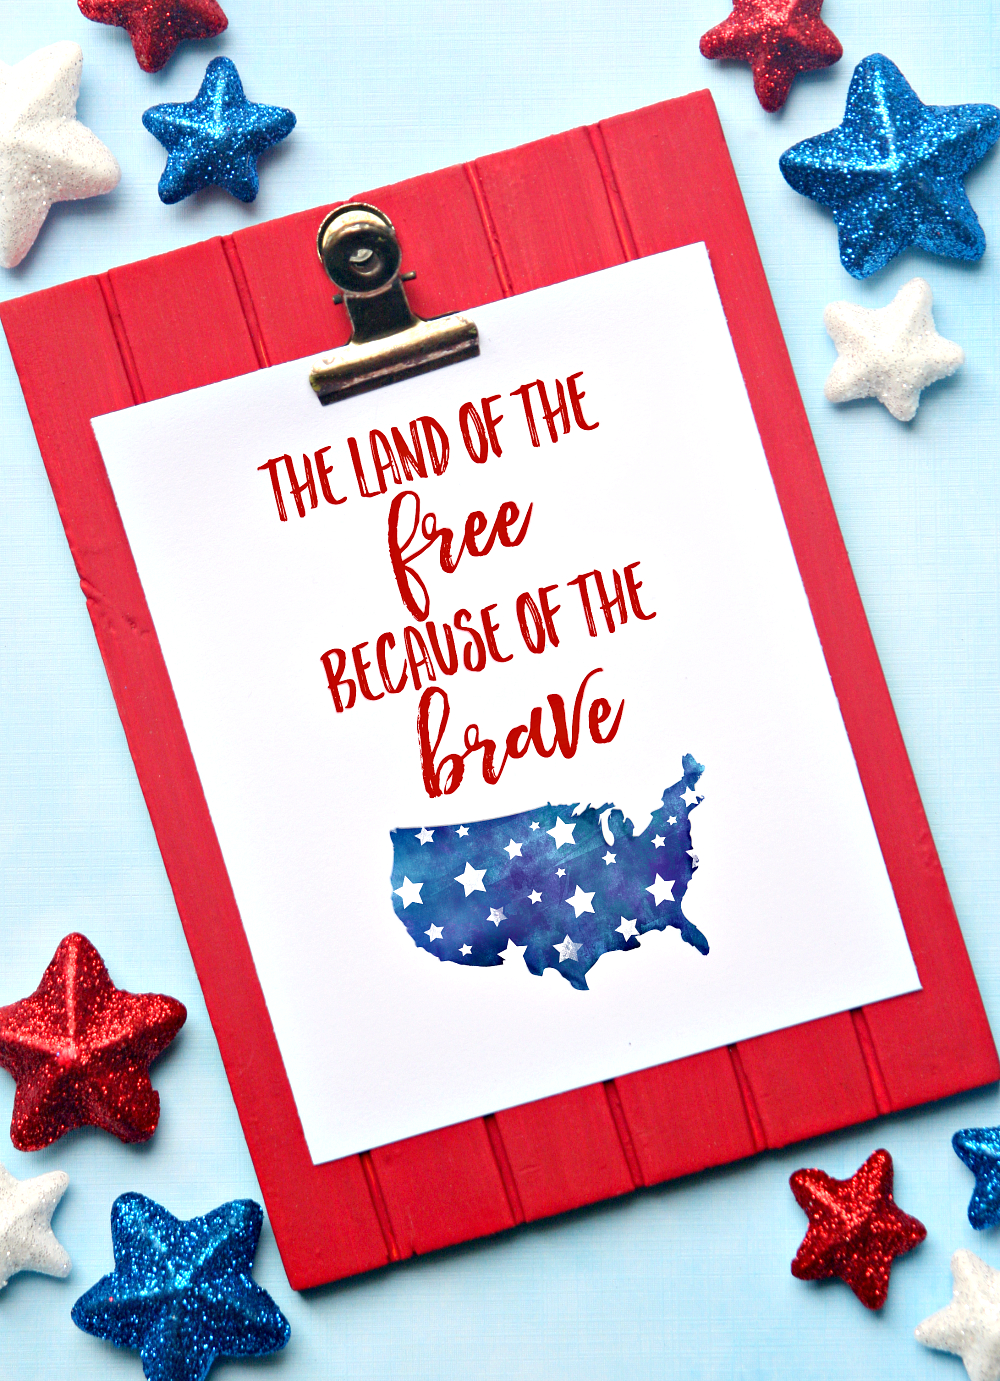 Land Of The Free Because Of The Brave - Home Of The Free Because Of The Brave Printable